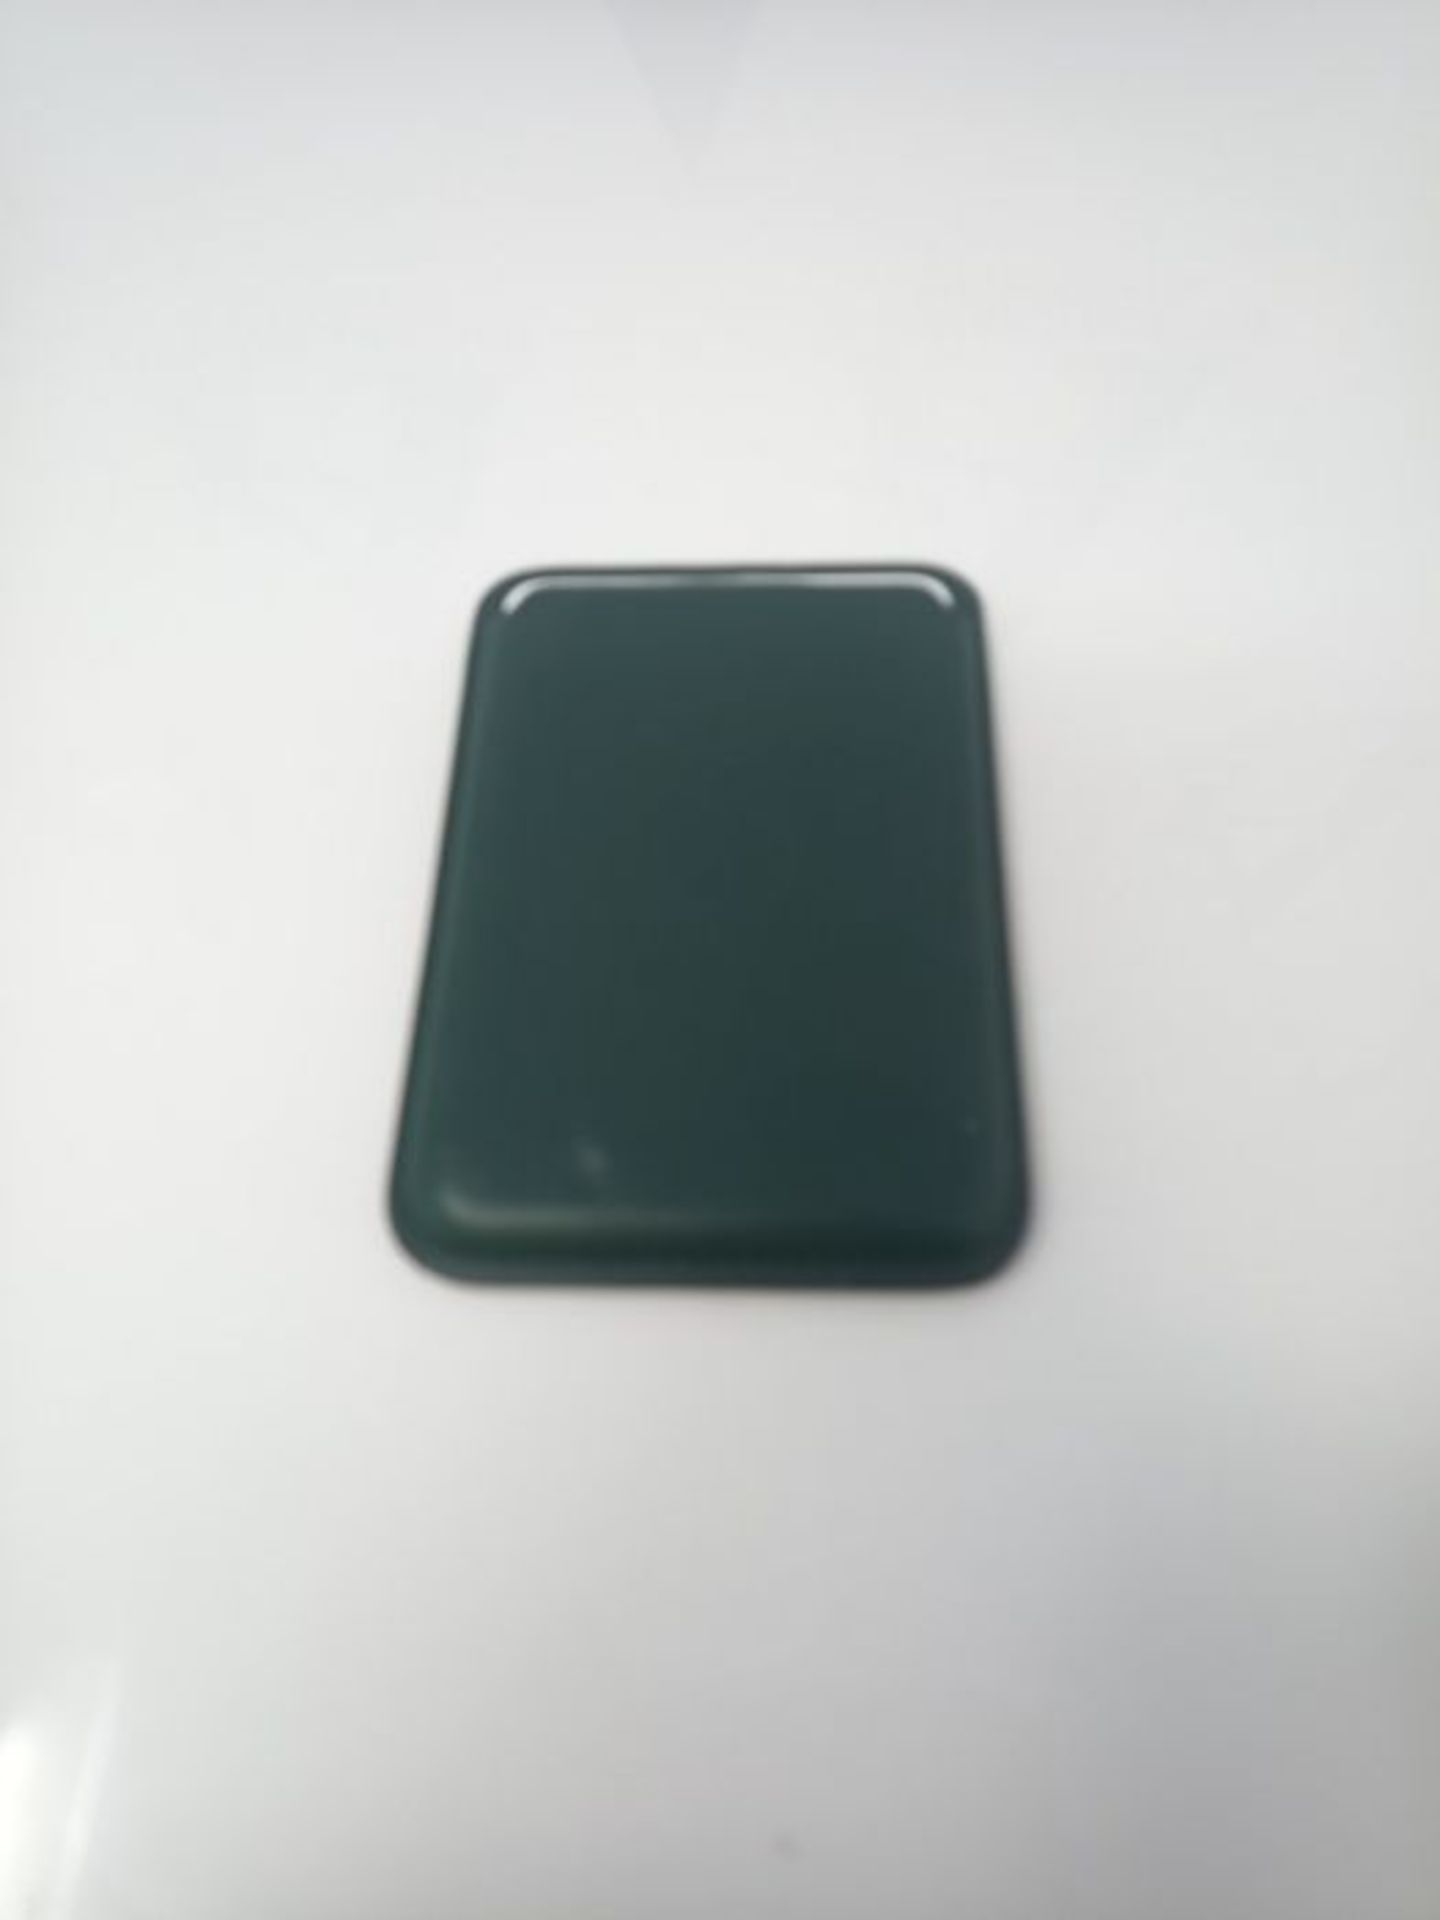 Apple Leather Wallet with MagSafe (for iPhone) - Sequoia Green - Image 3 of 3